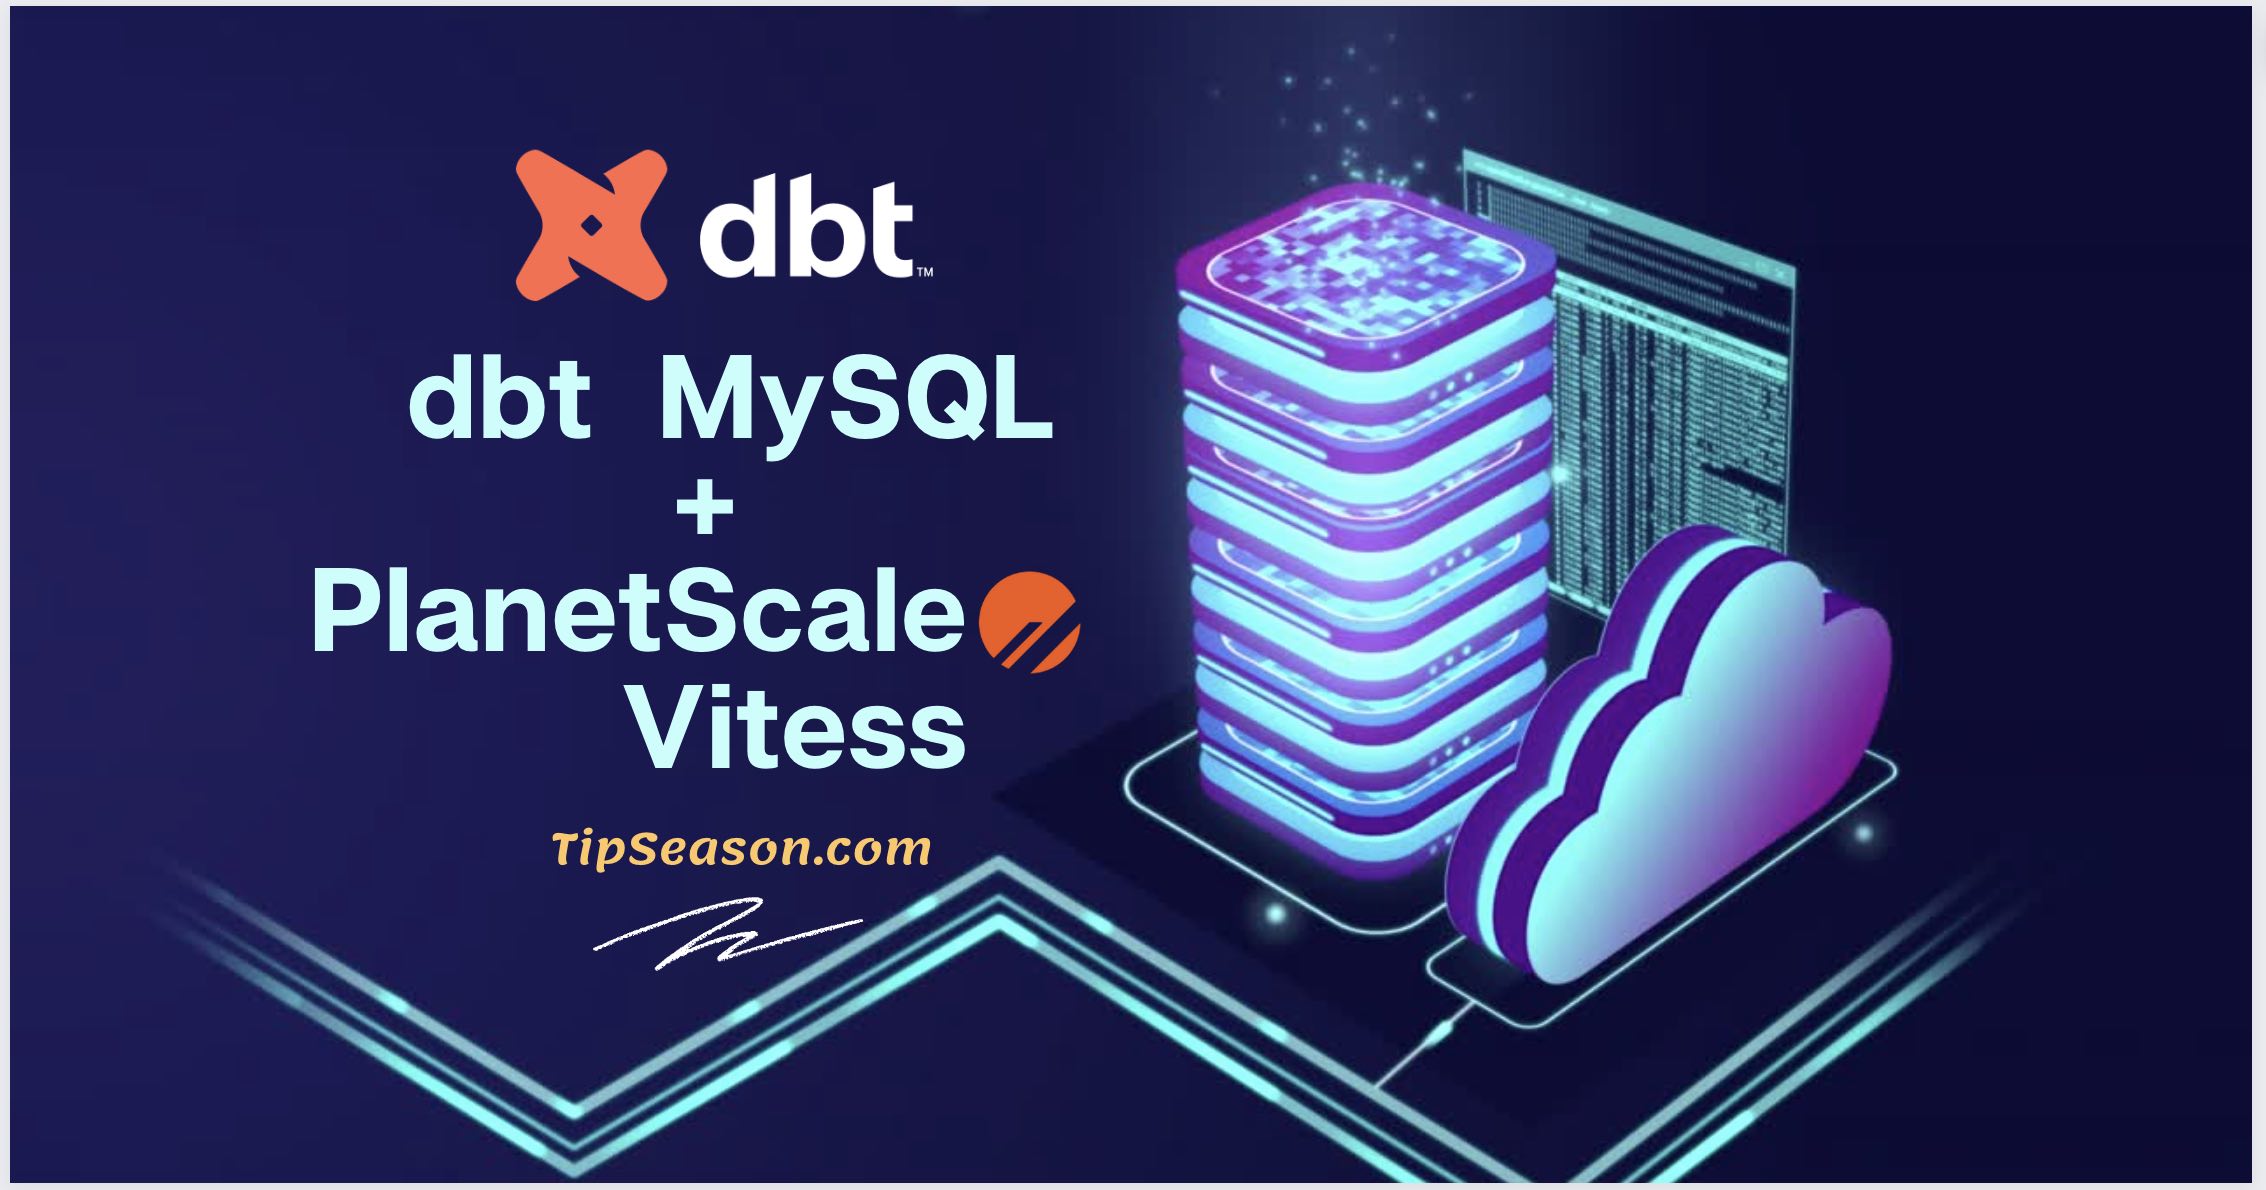 Connecting dbt mysql with PlanetScale database (Vitess) - A case study